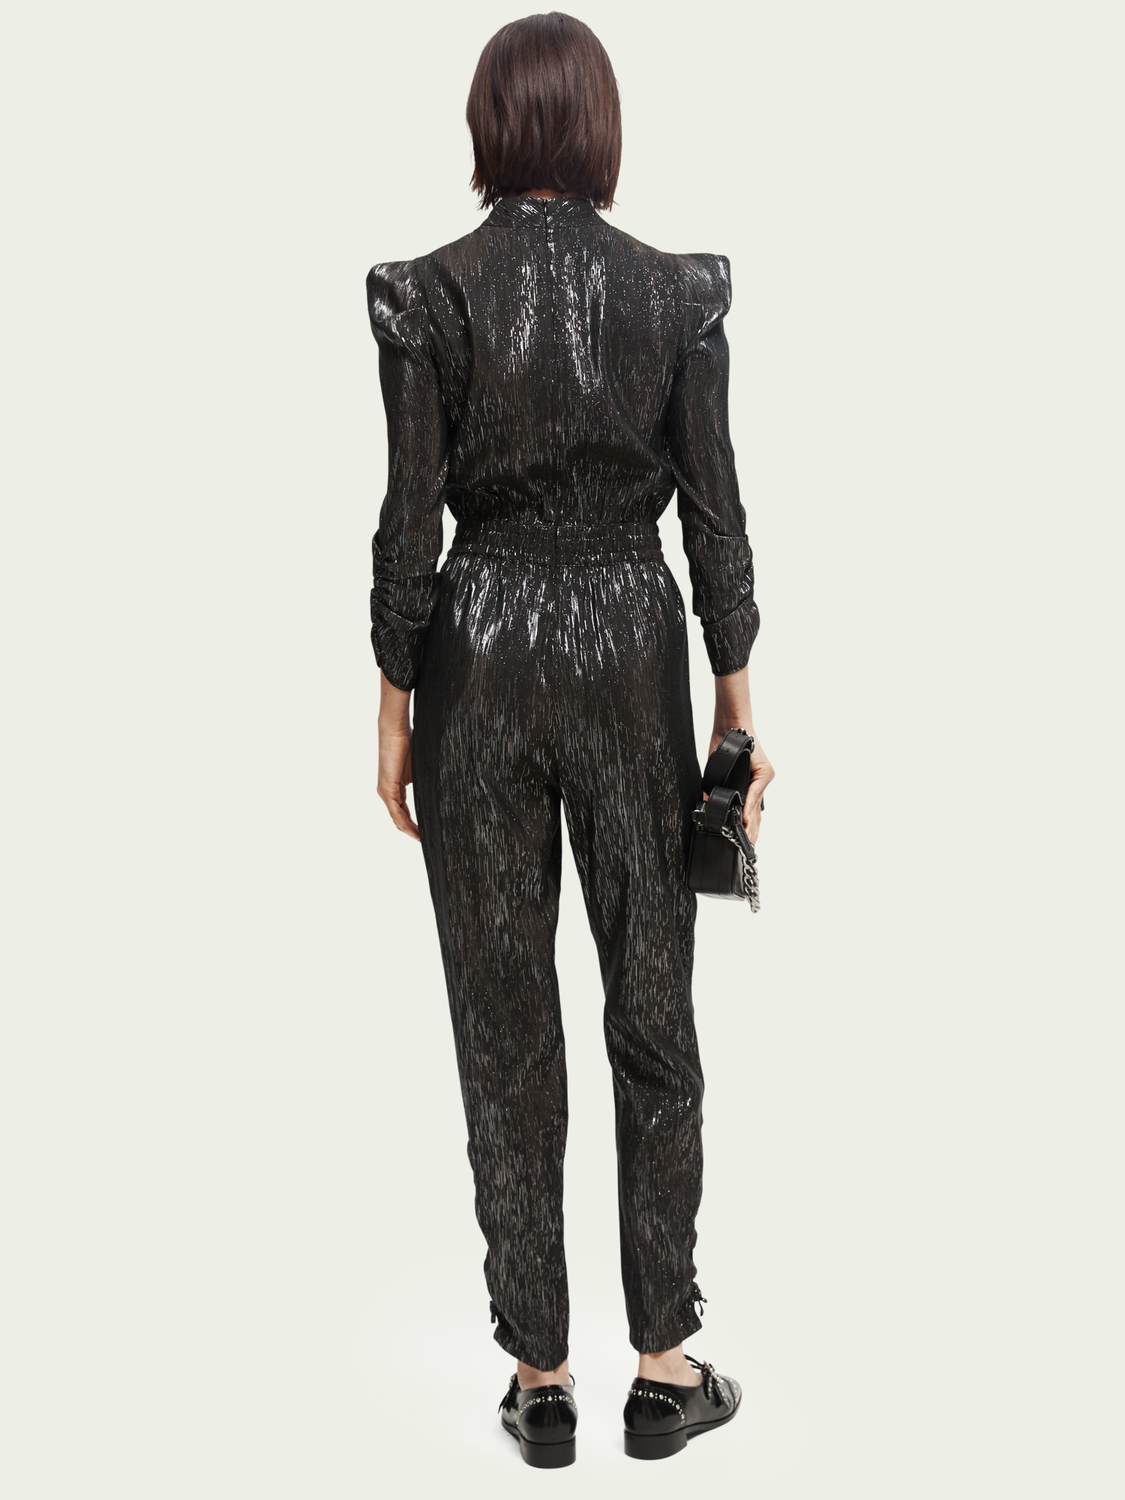 Silver jumpsuit with gathered details - Brave